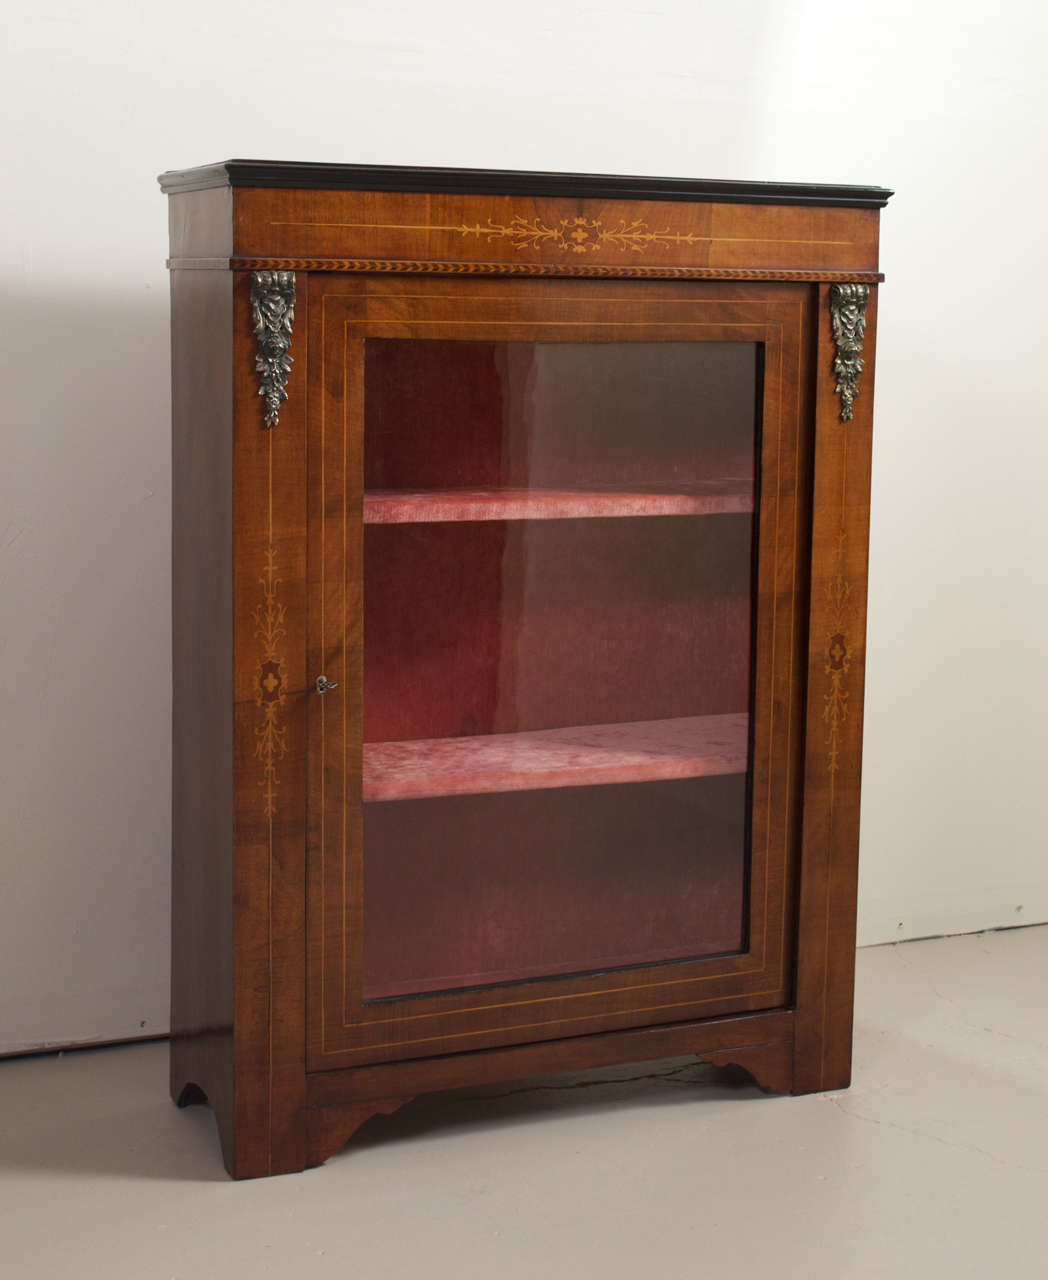 A beautiful inlaid French walnut side cabinet with brass ormolu. This single glass door cabinet has a red velvet lined two shelf interior. There is a black ebonized molding around the top and an elegant satinwood inlay pattern below that also goes